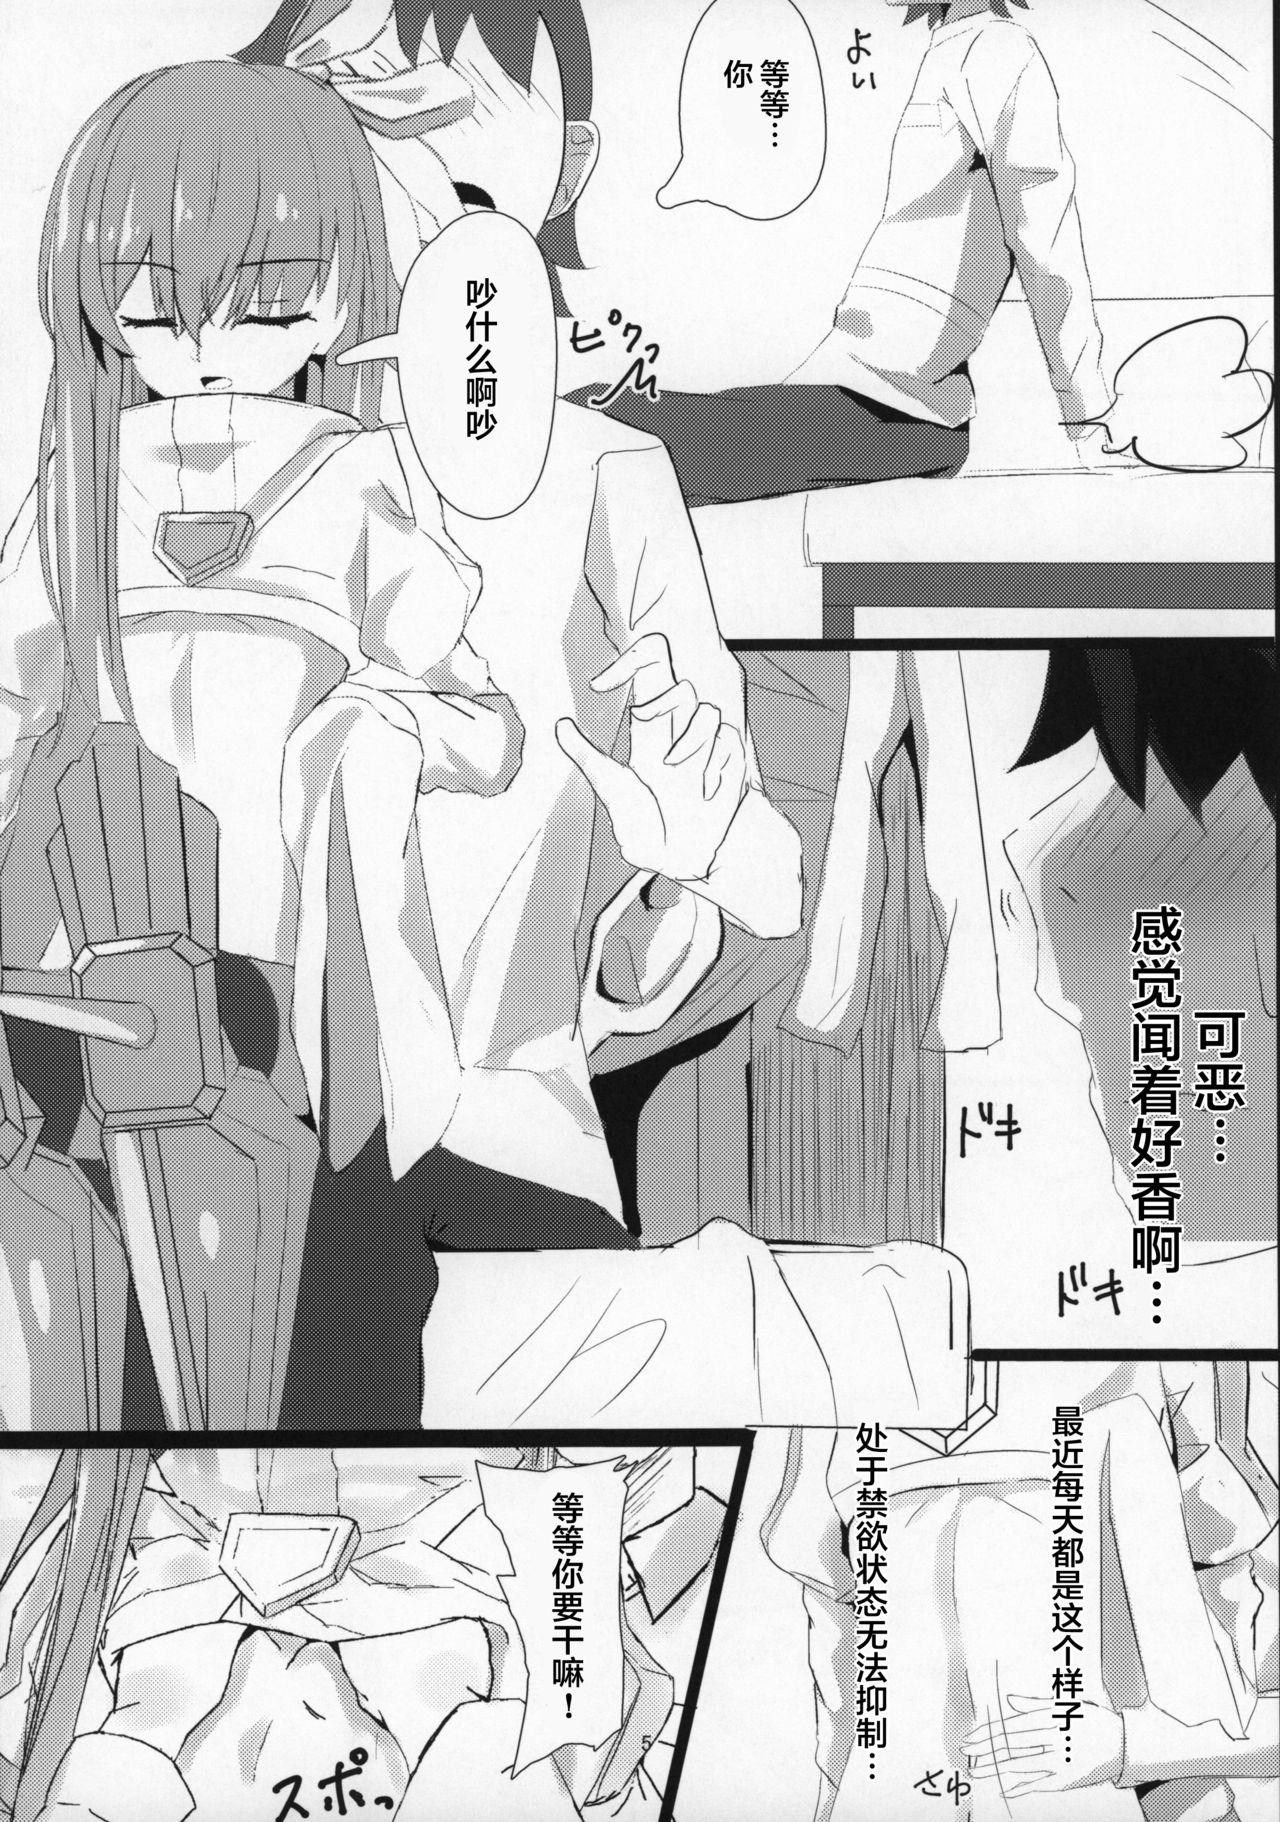 Tites Melt down - Fate grand order Toying - Page 5